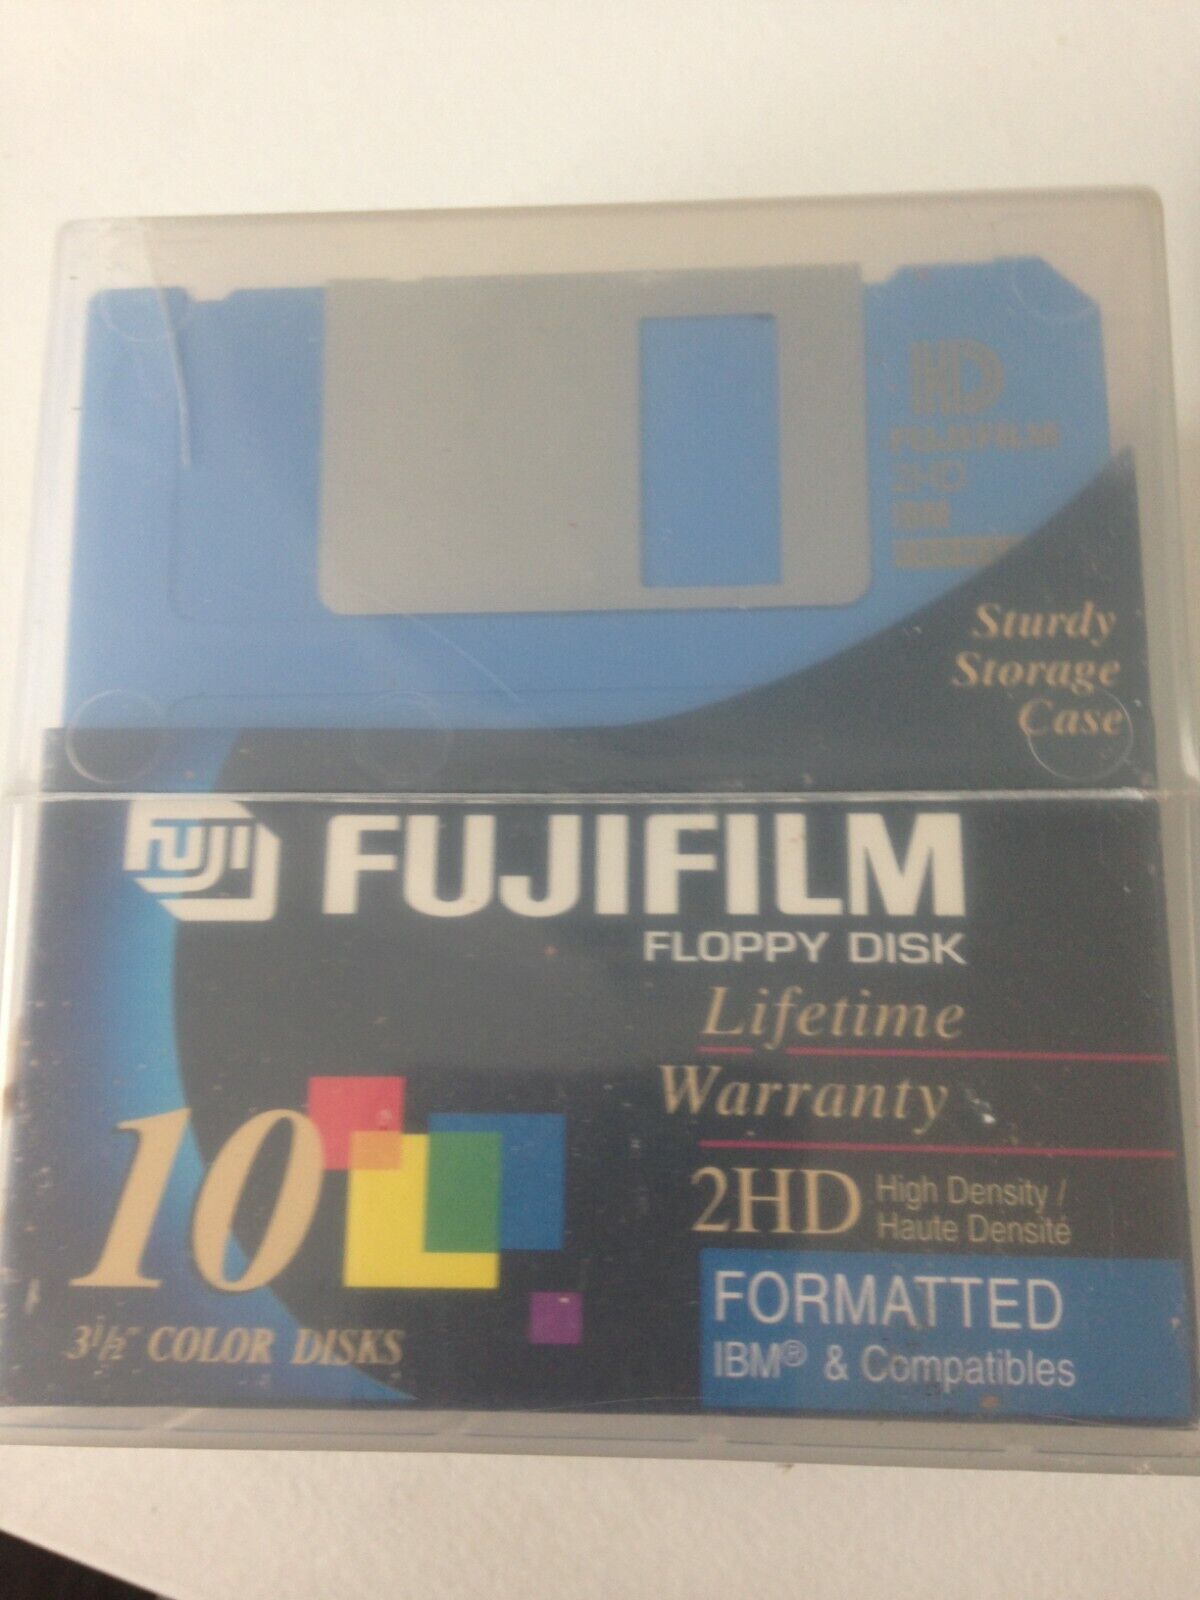 Fuji Floppy Disk 3.5 PC IBM Formatted 2HD Diskettes High-Density 10-Pack A1 Rare